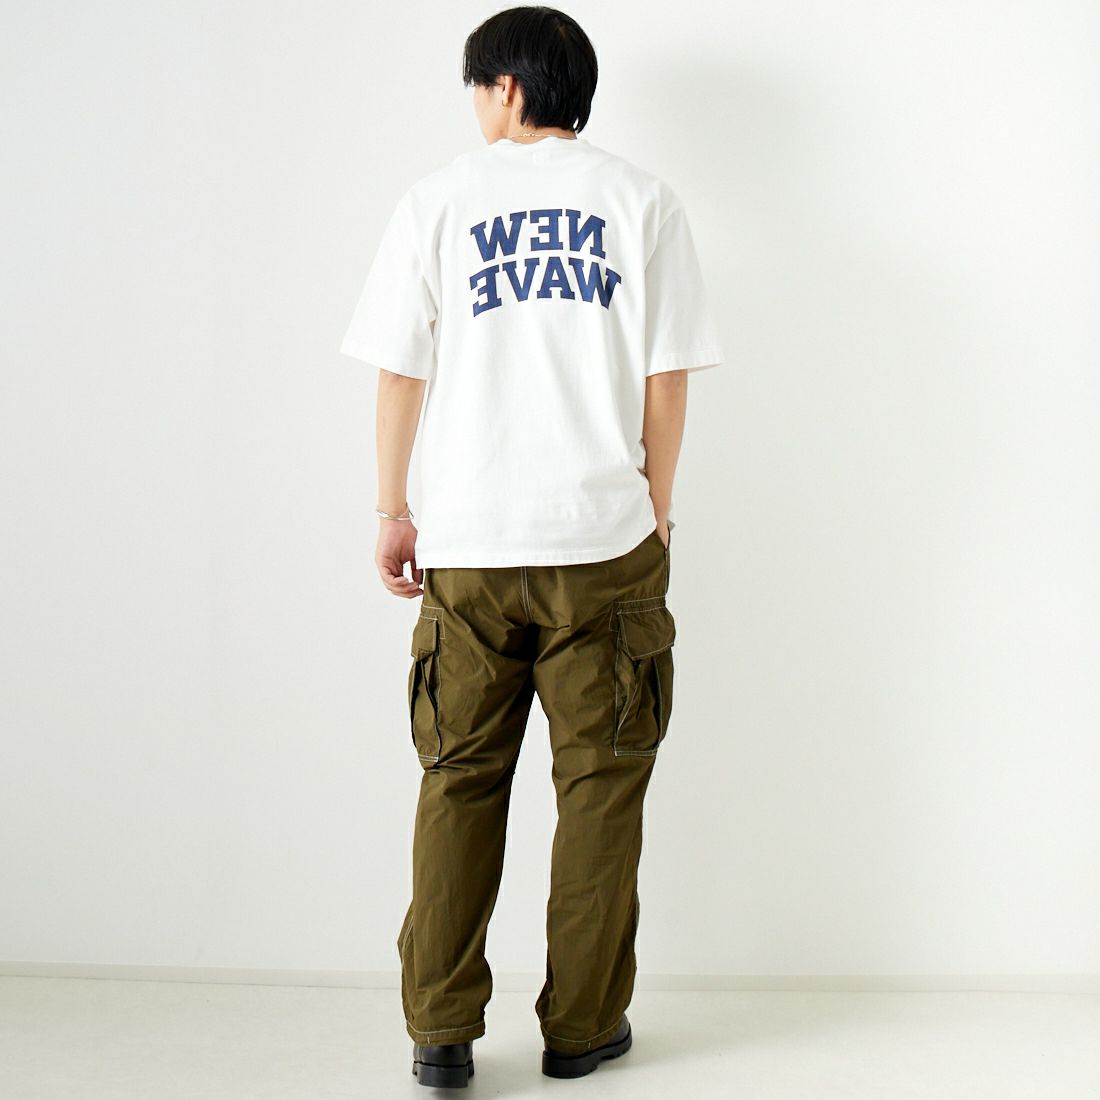 blurhms ROOTSTOCK [ブラームス ルーツストック] 別注 NEW WAVE プリントTシャツ [BROOTS24S34-JF] WHITE &&モデル身長：179cm 着用サイズ：3&&